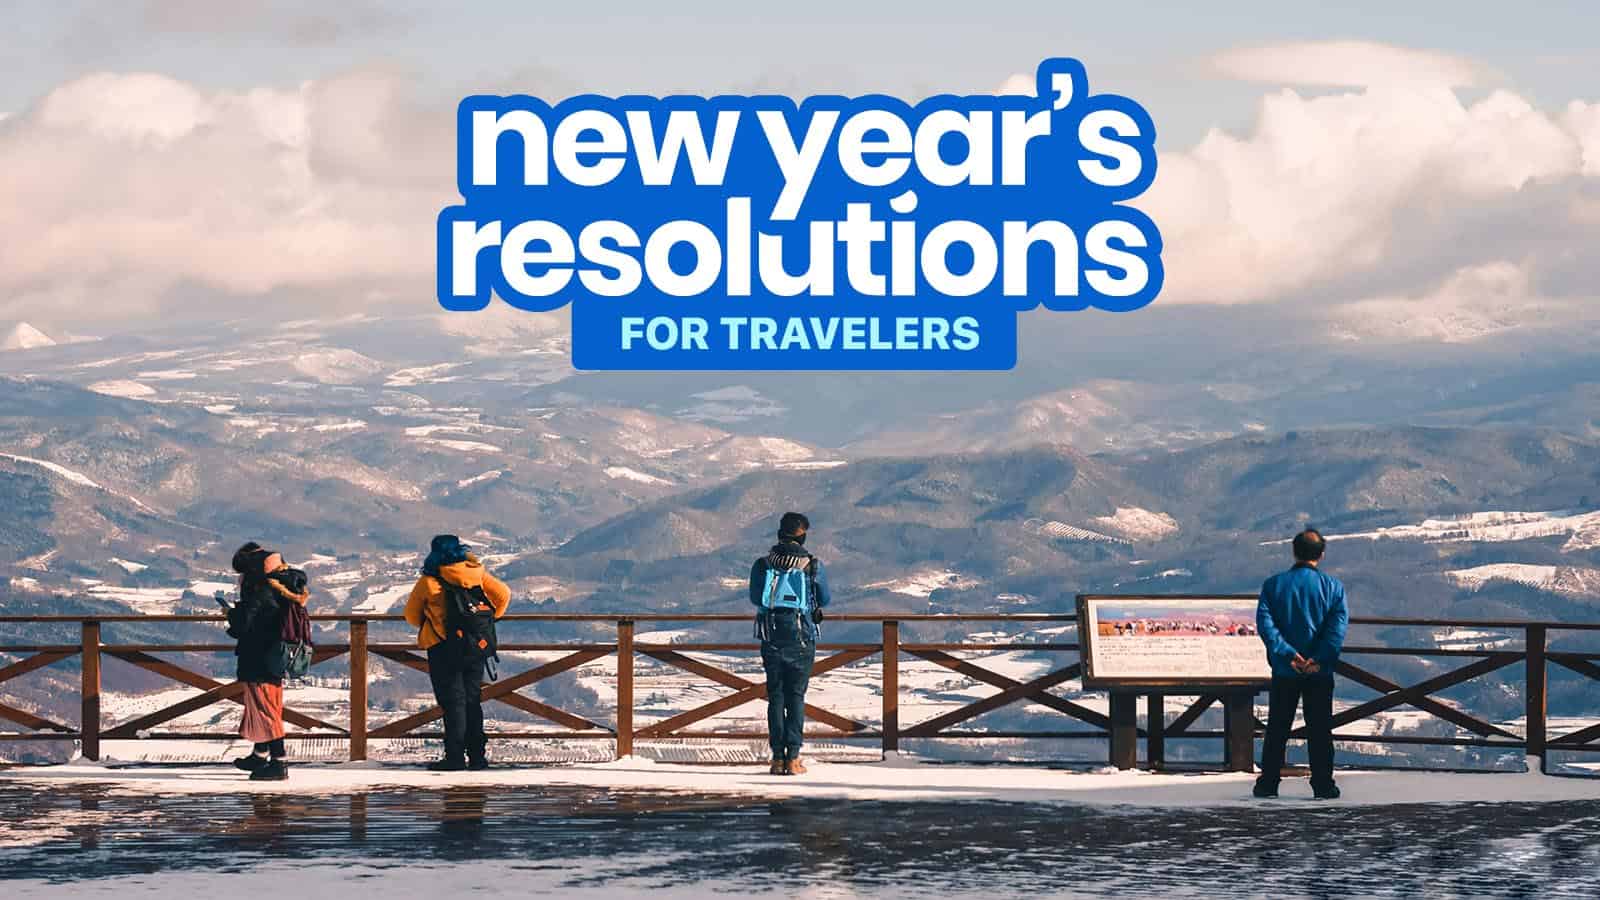 NEW YEAR’S RESOLUTIONS for Travelers